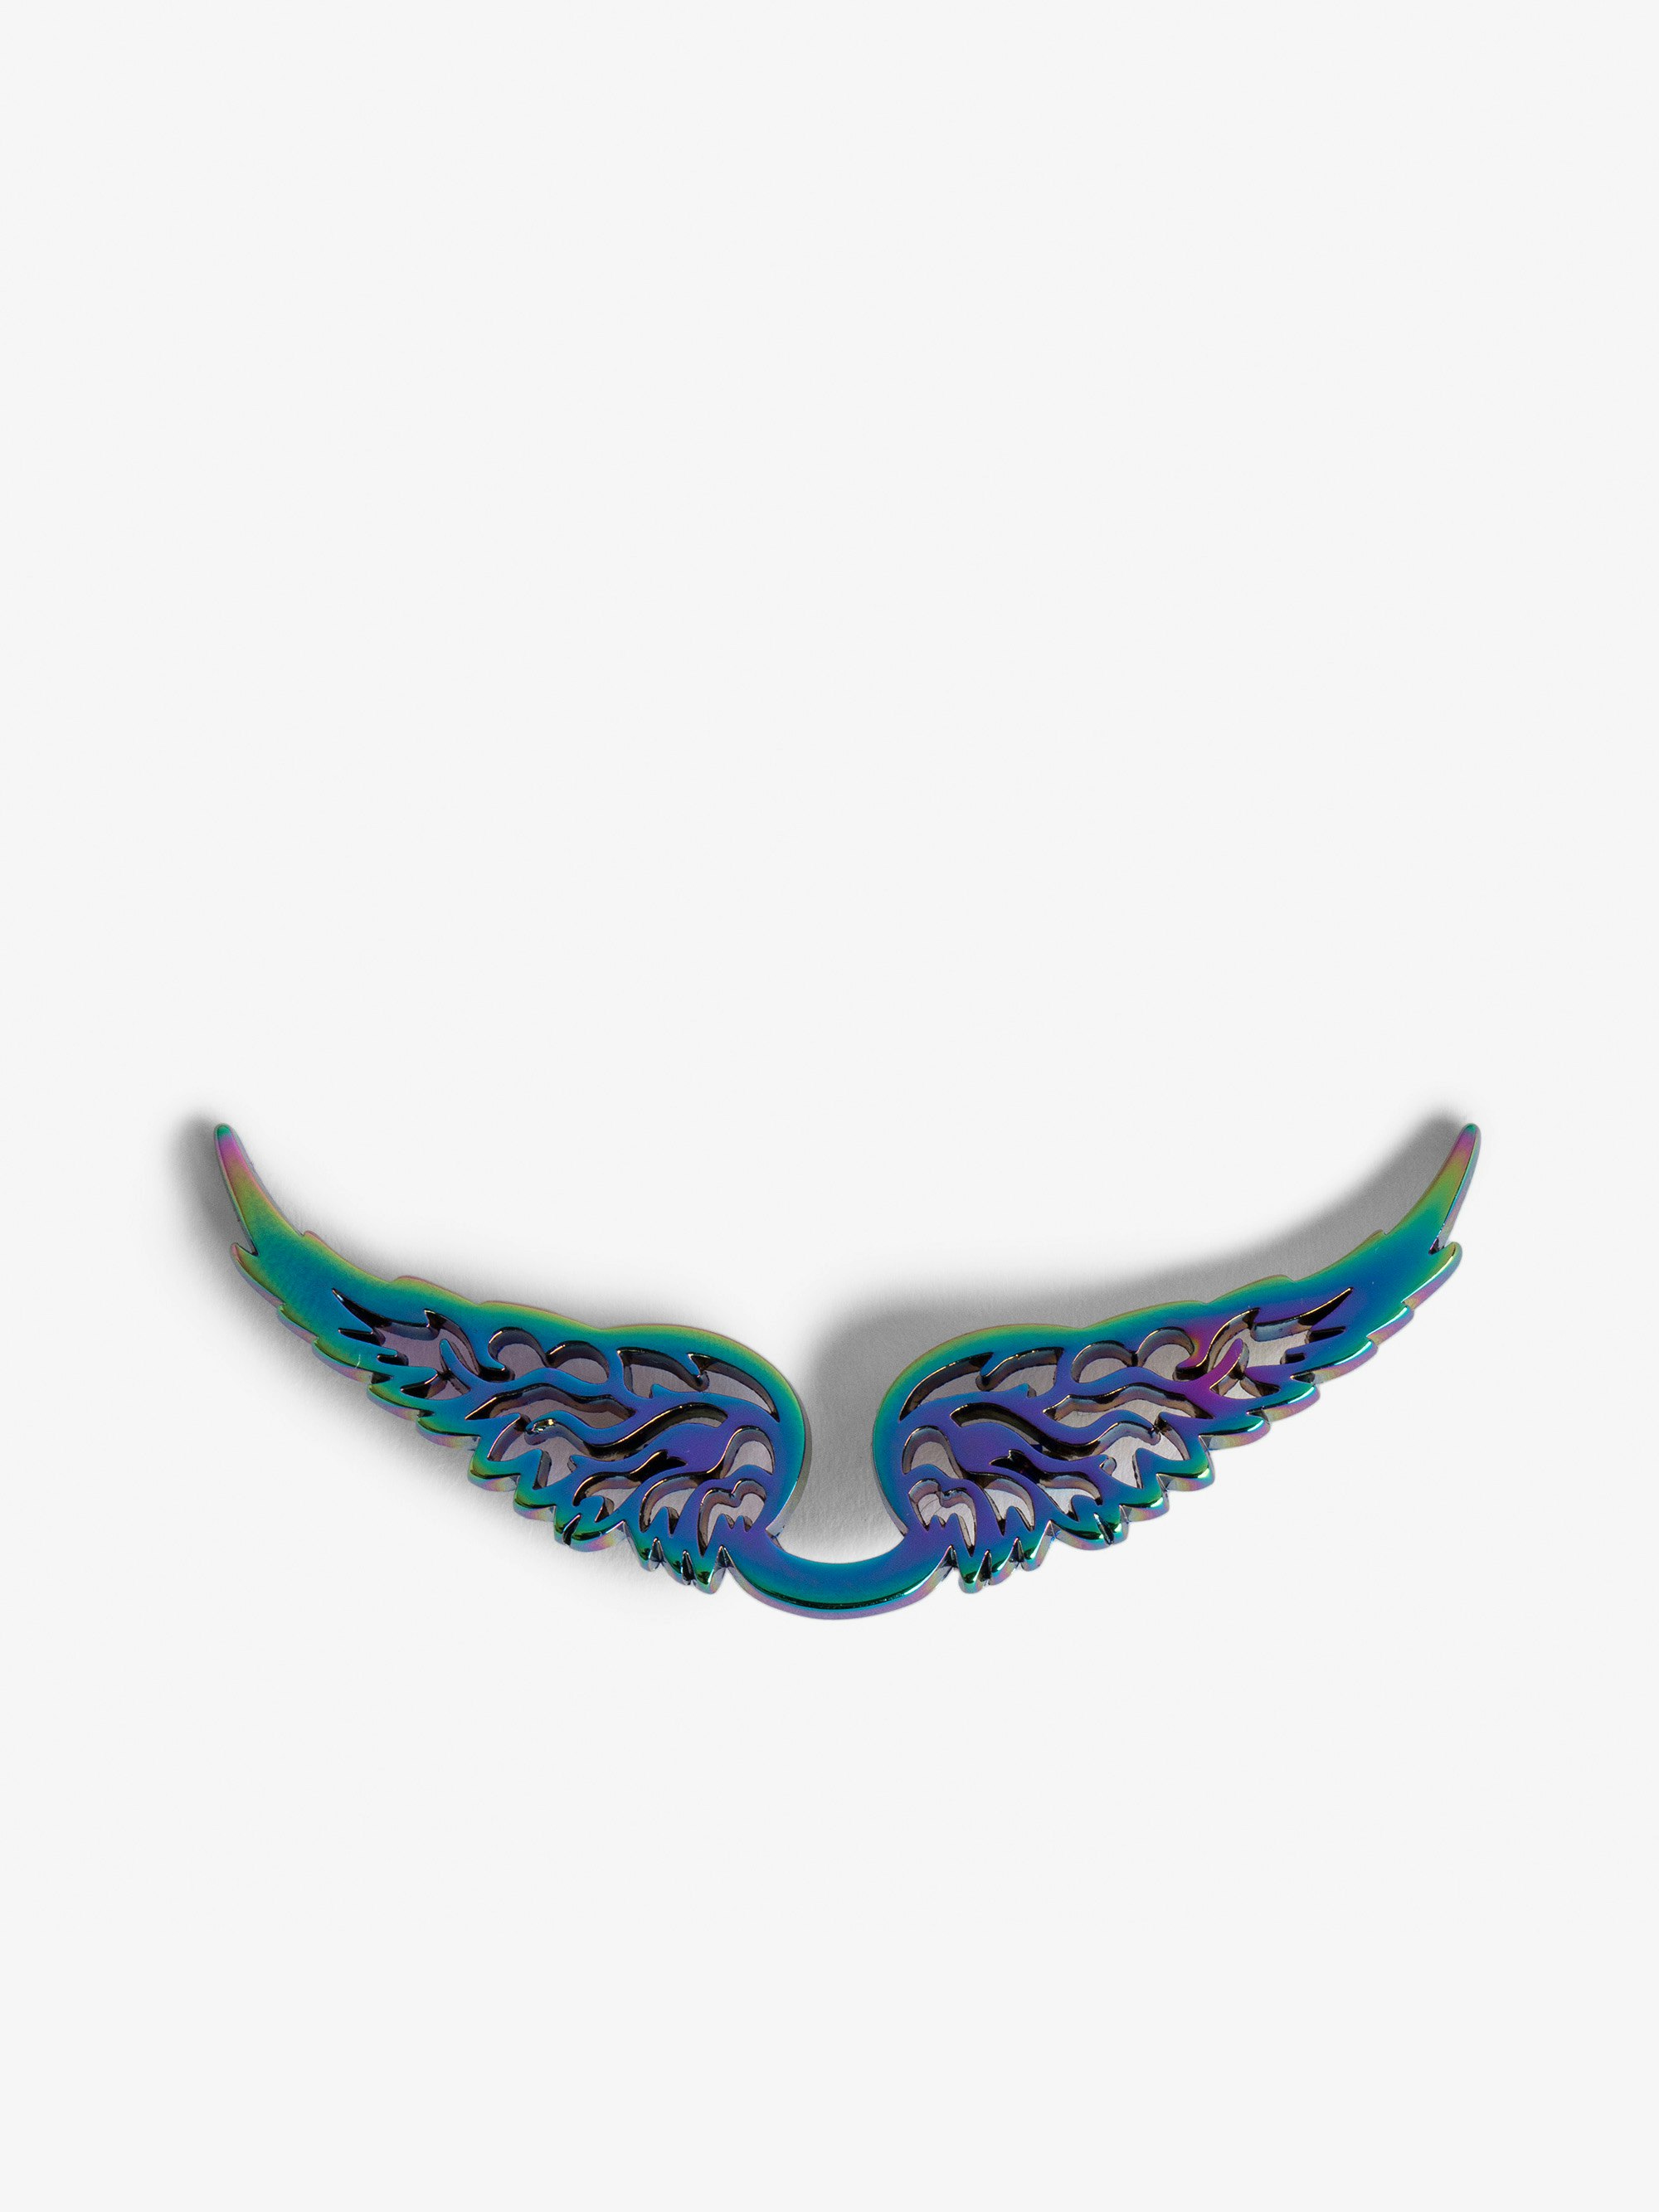 Rainbow Swing Your Wings Charm - Clip-on wings charm. for Rock Swing Your Wings clutch.